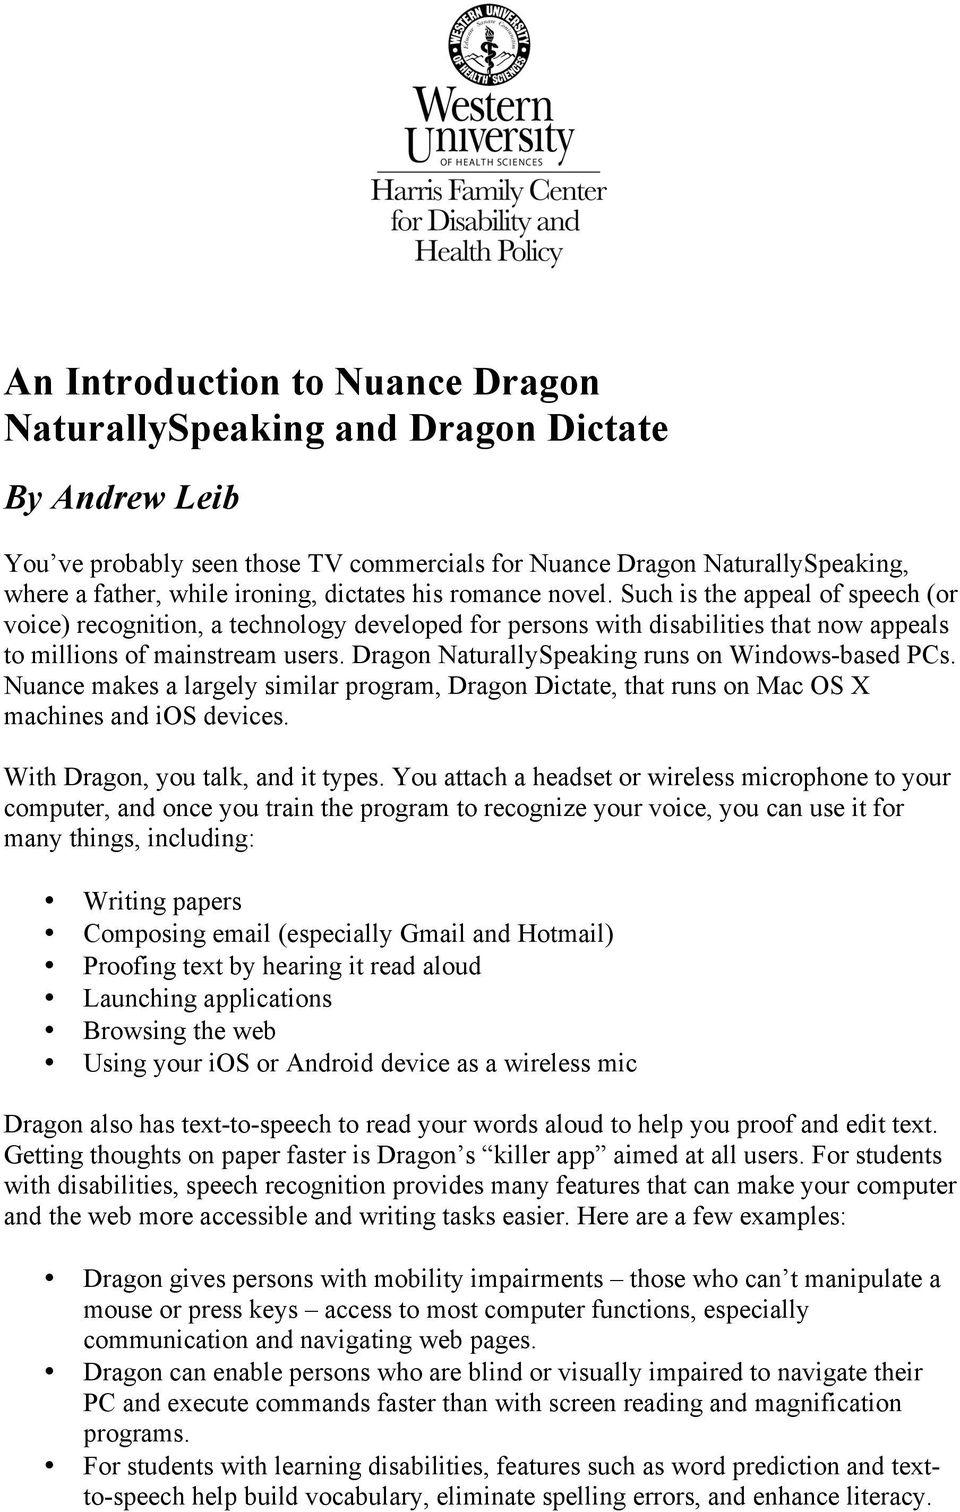 dragon dictate for mac help